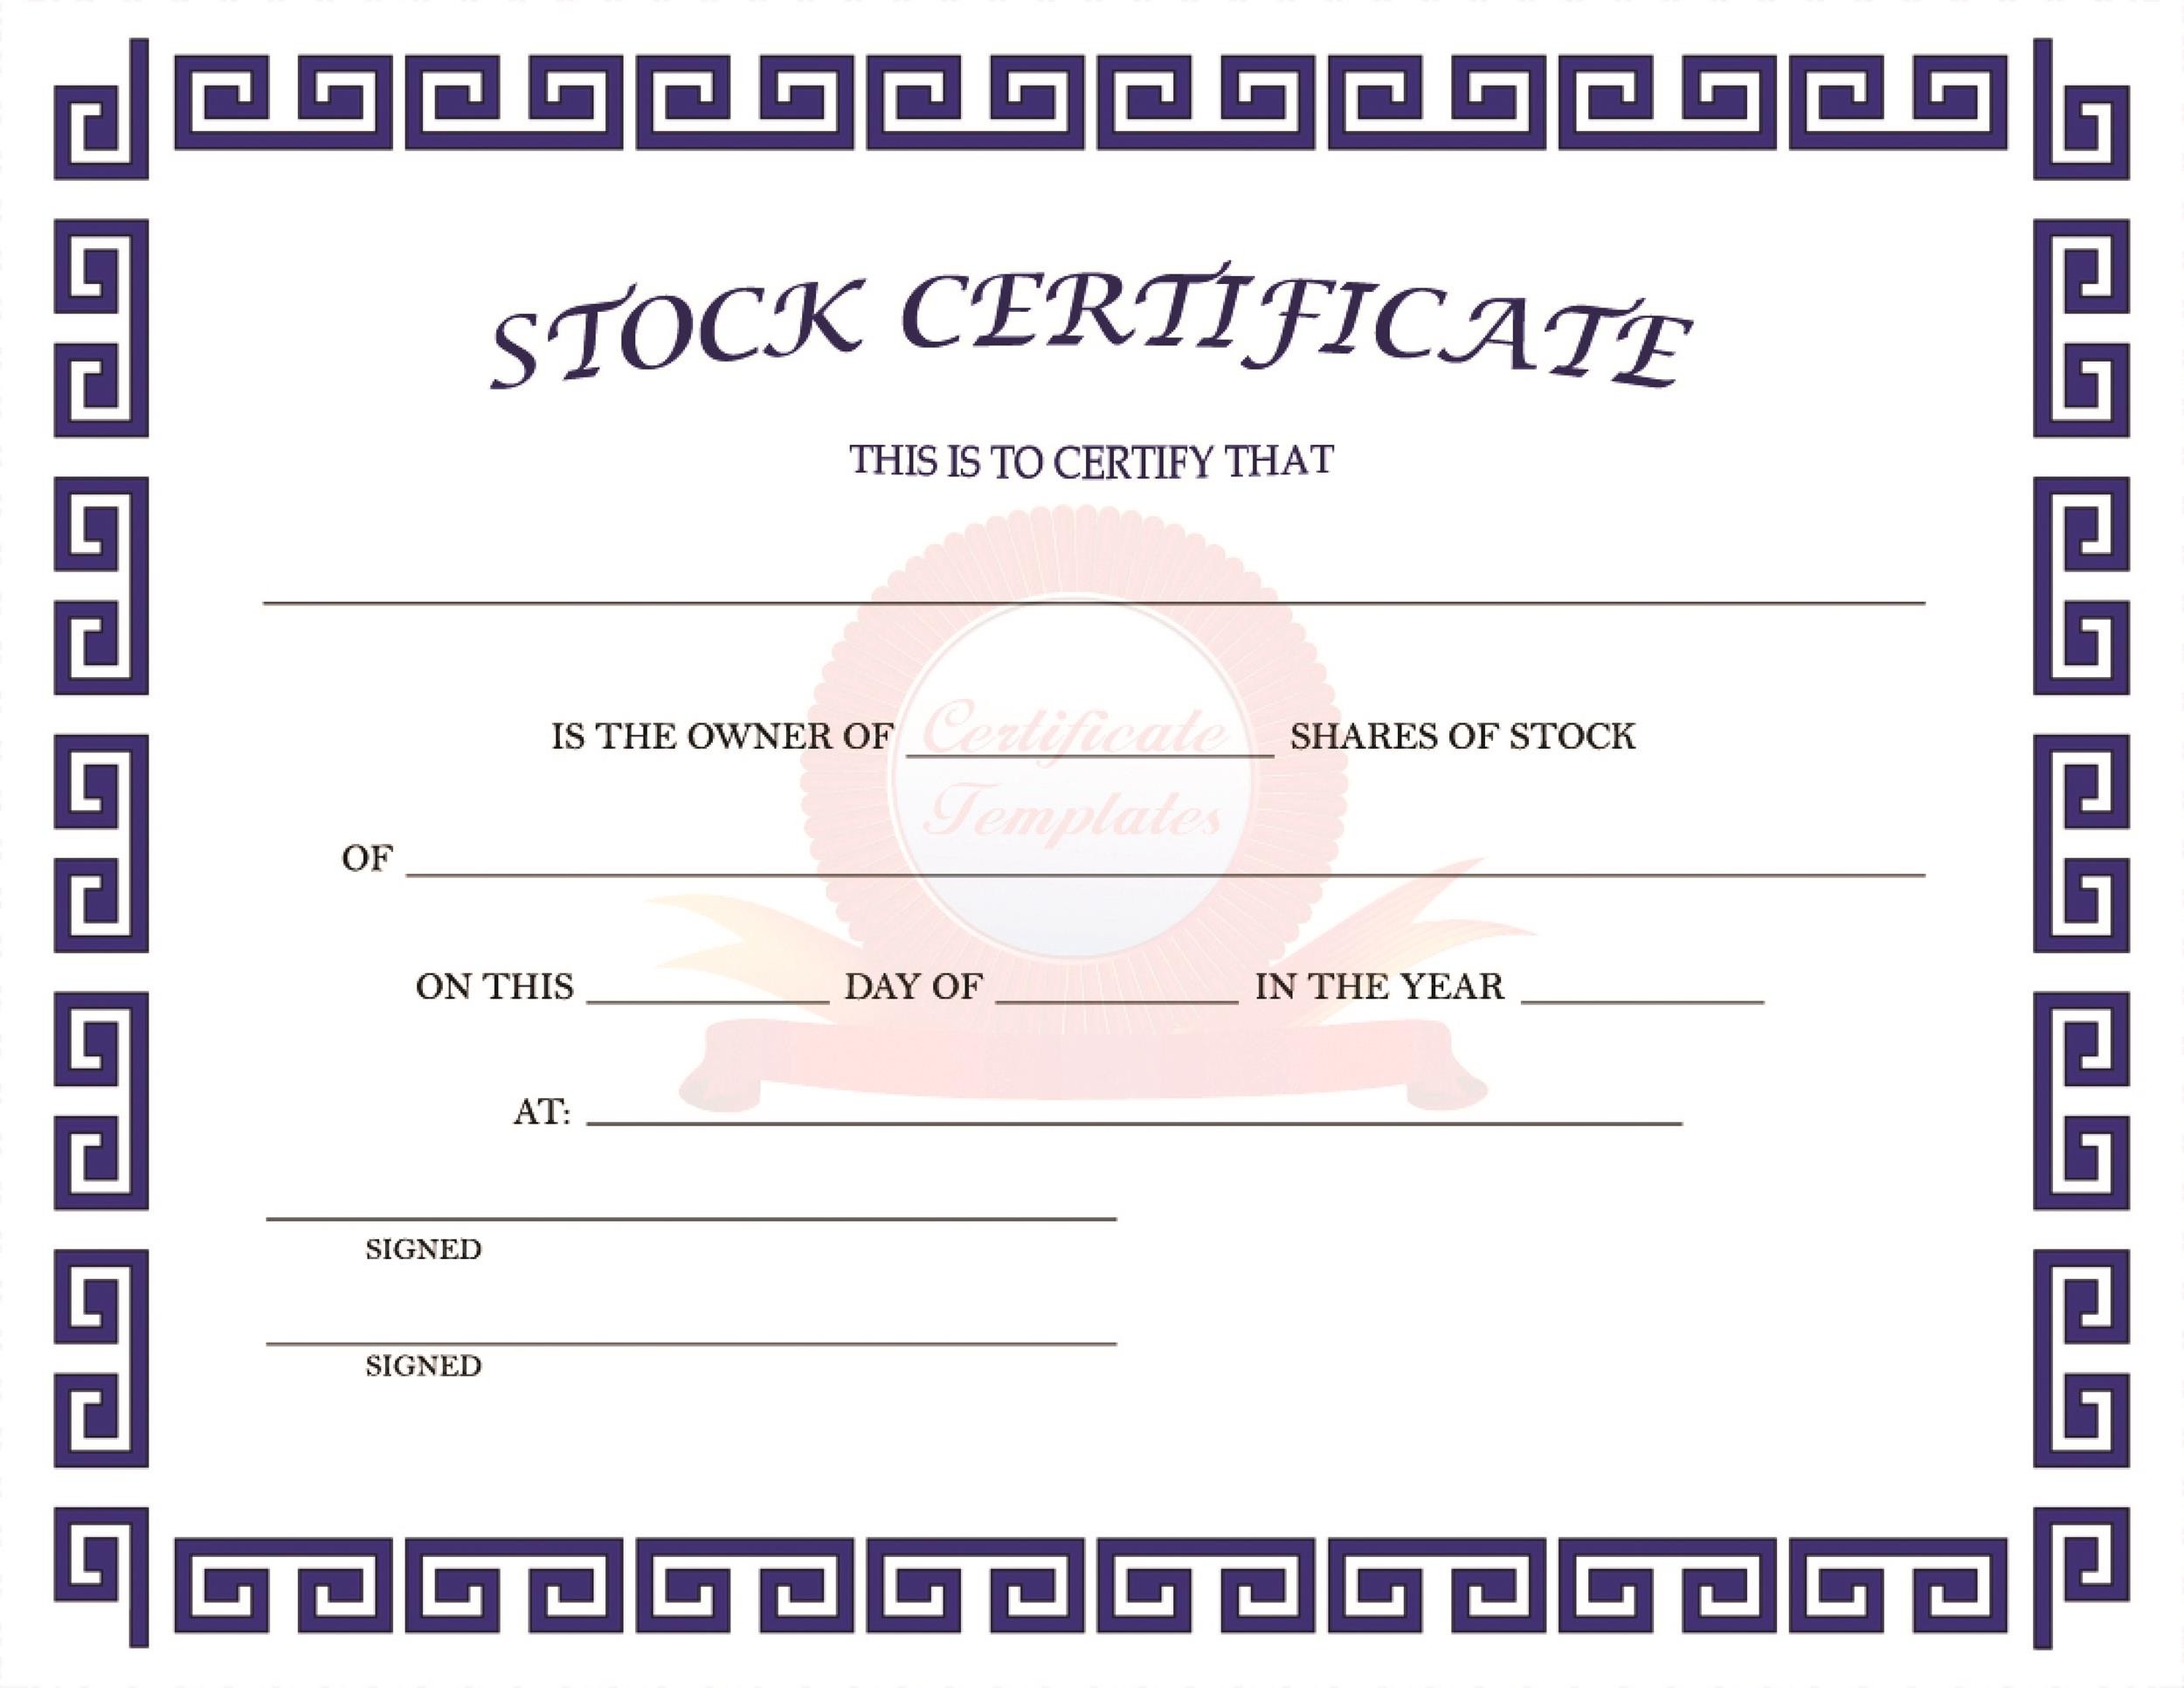 Share Certificate Format In Excel - Captions Trendy Inside Corporate Share Certificate Template